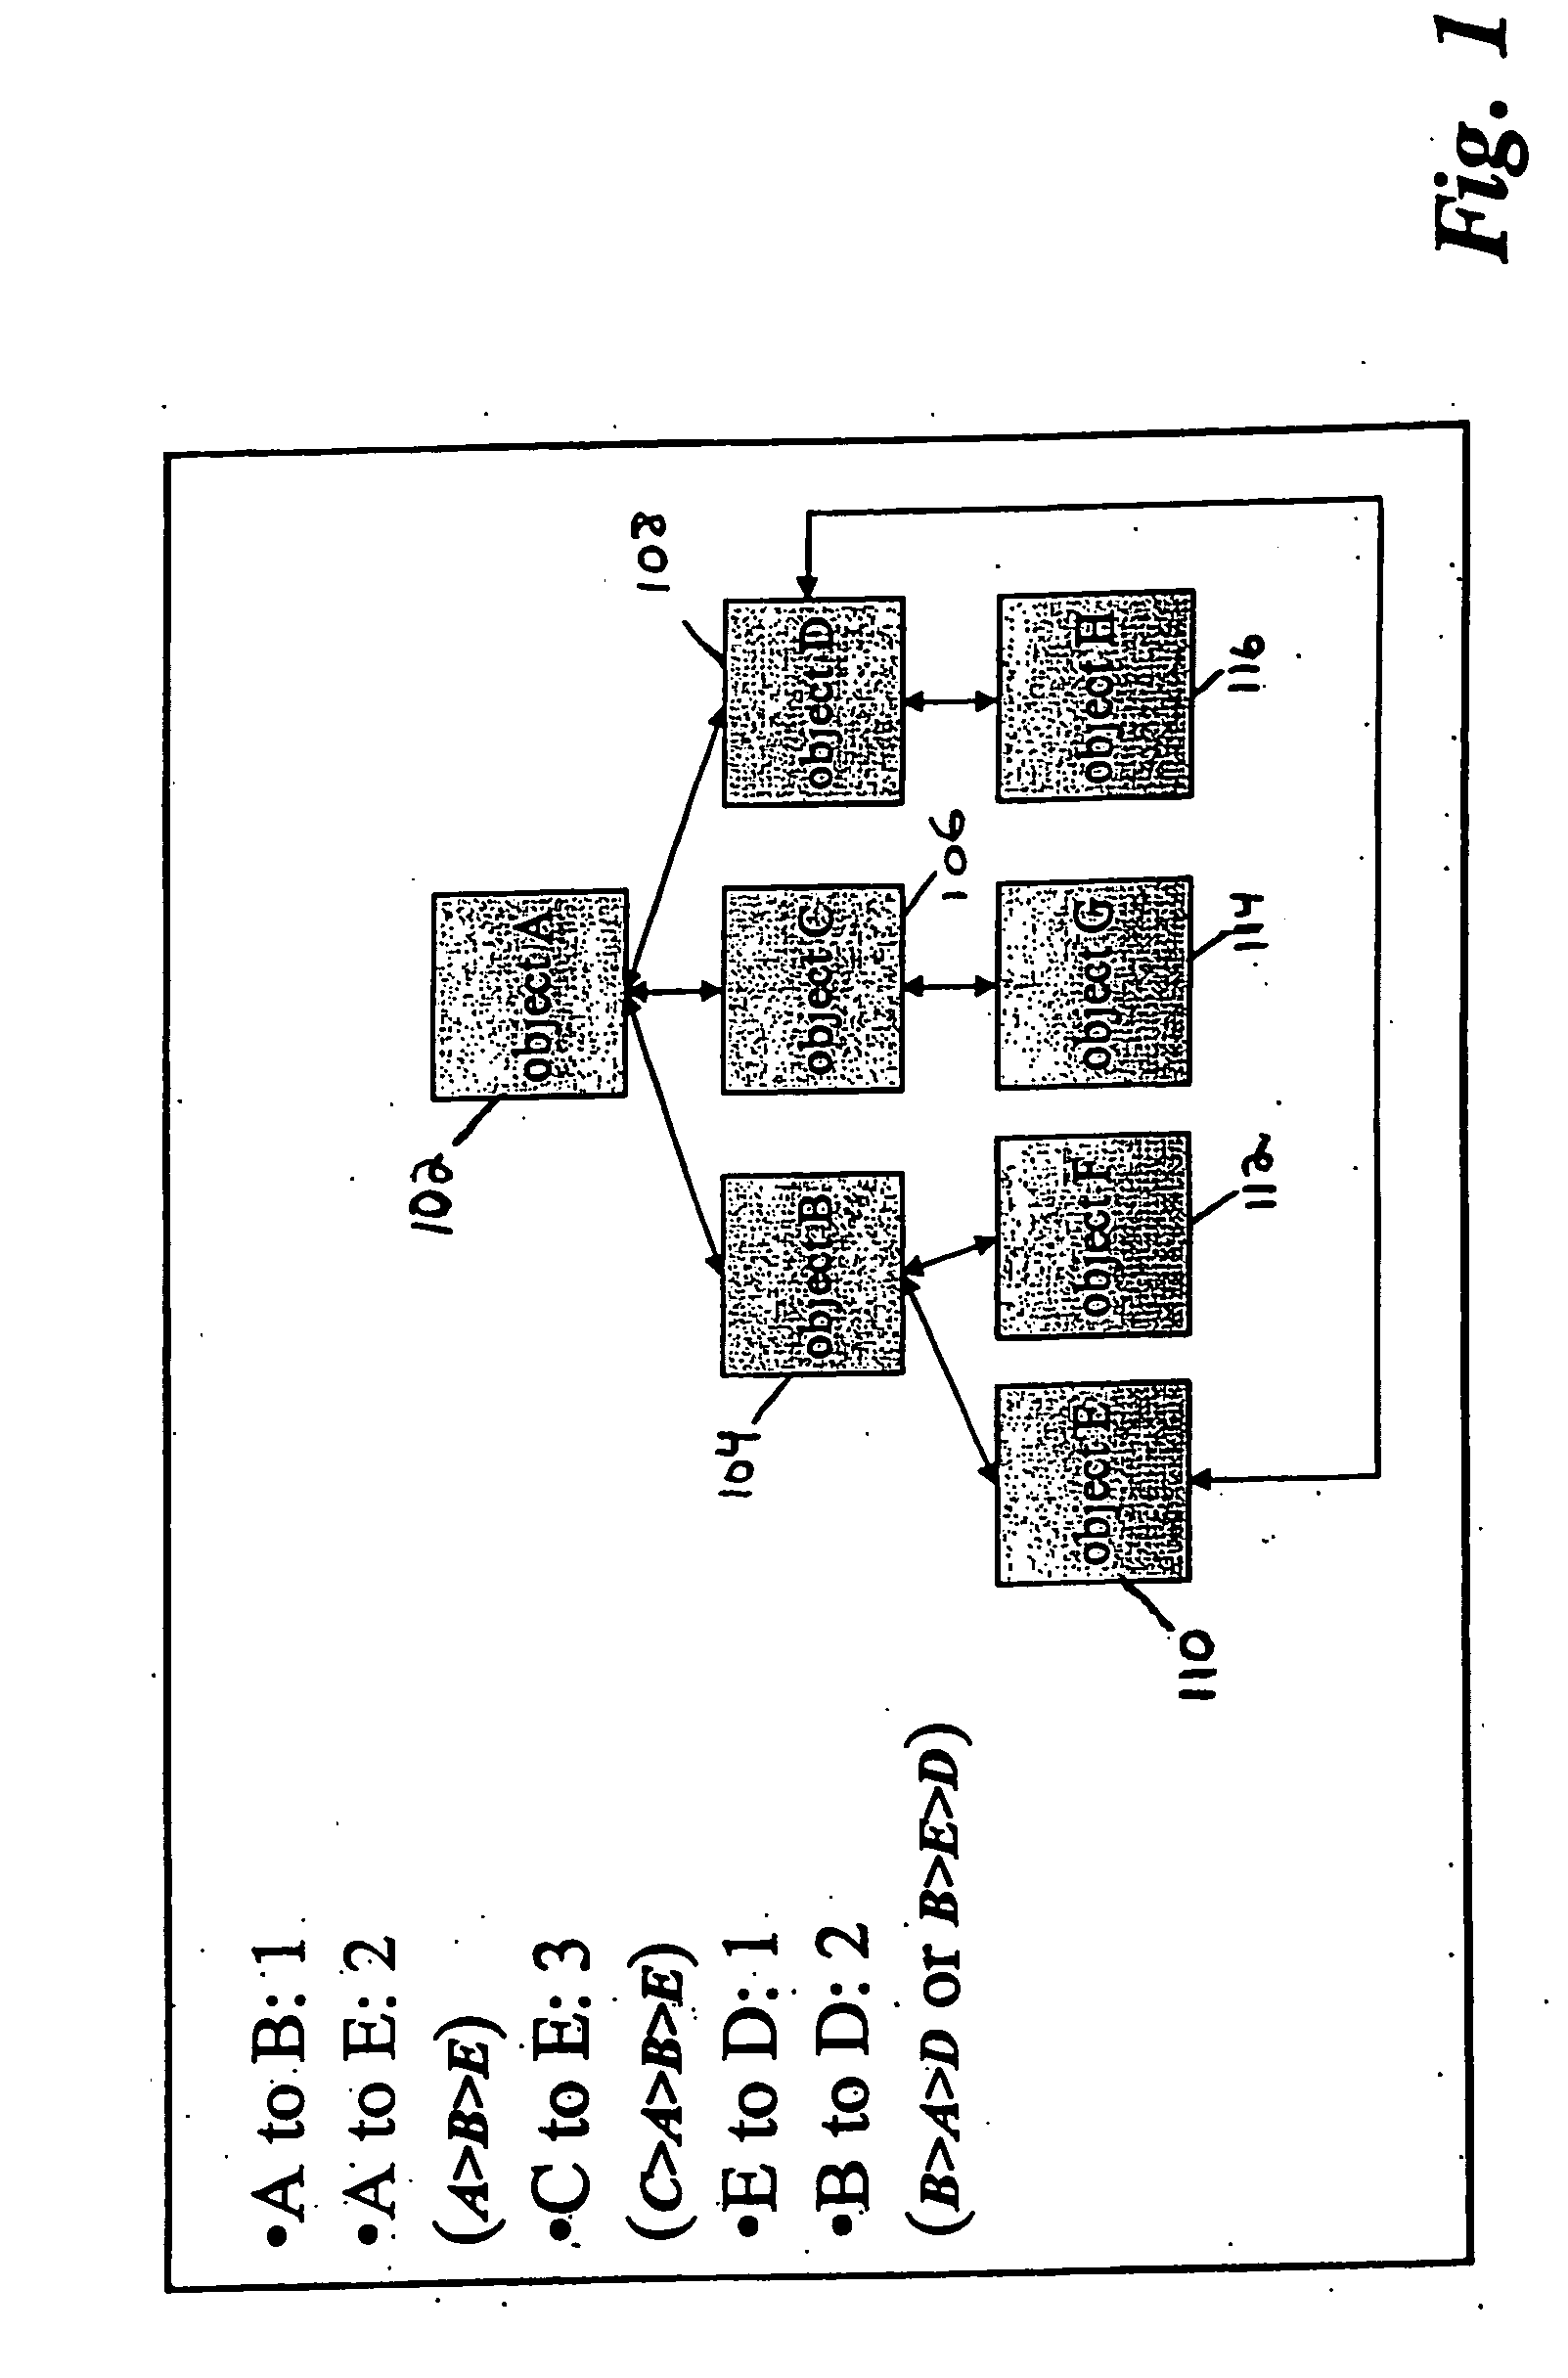 System and method for modifying links within a web site